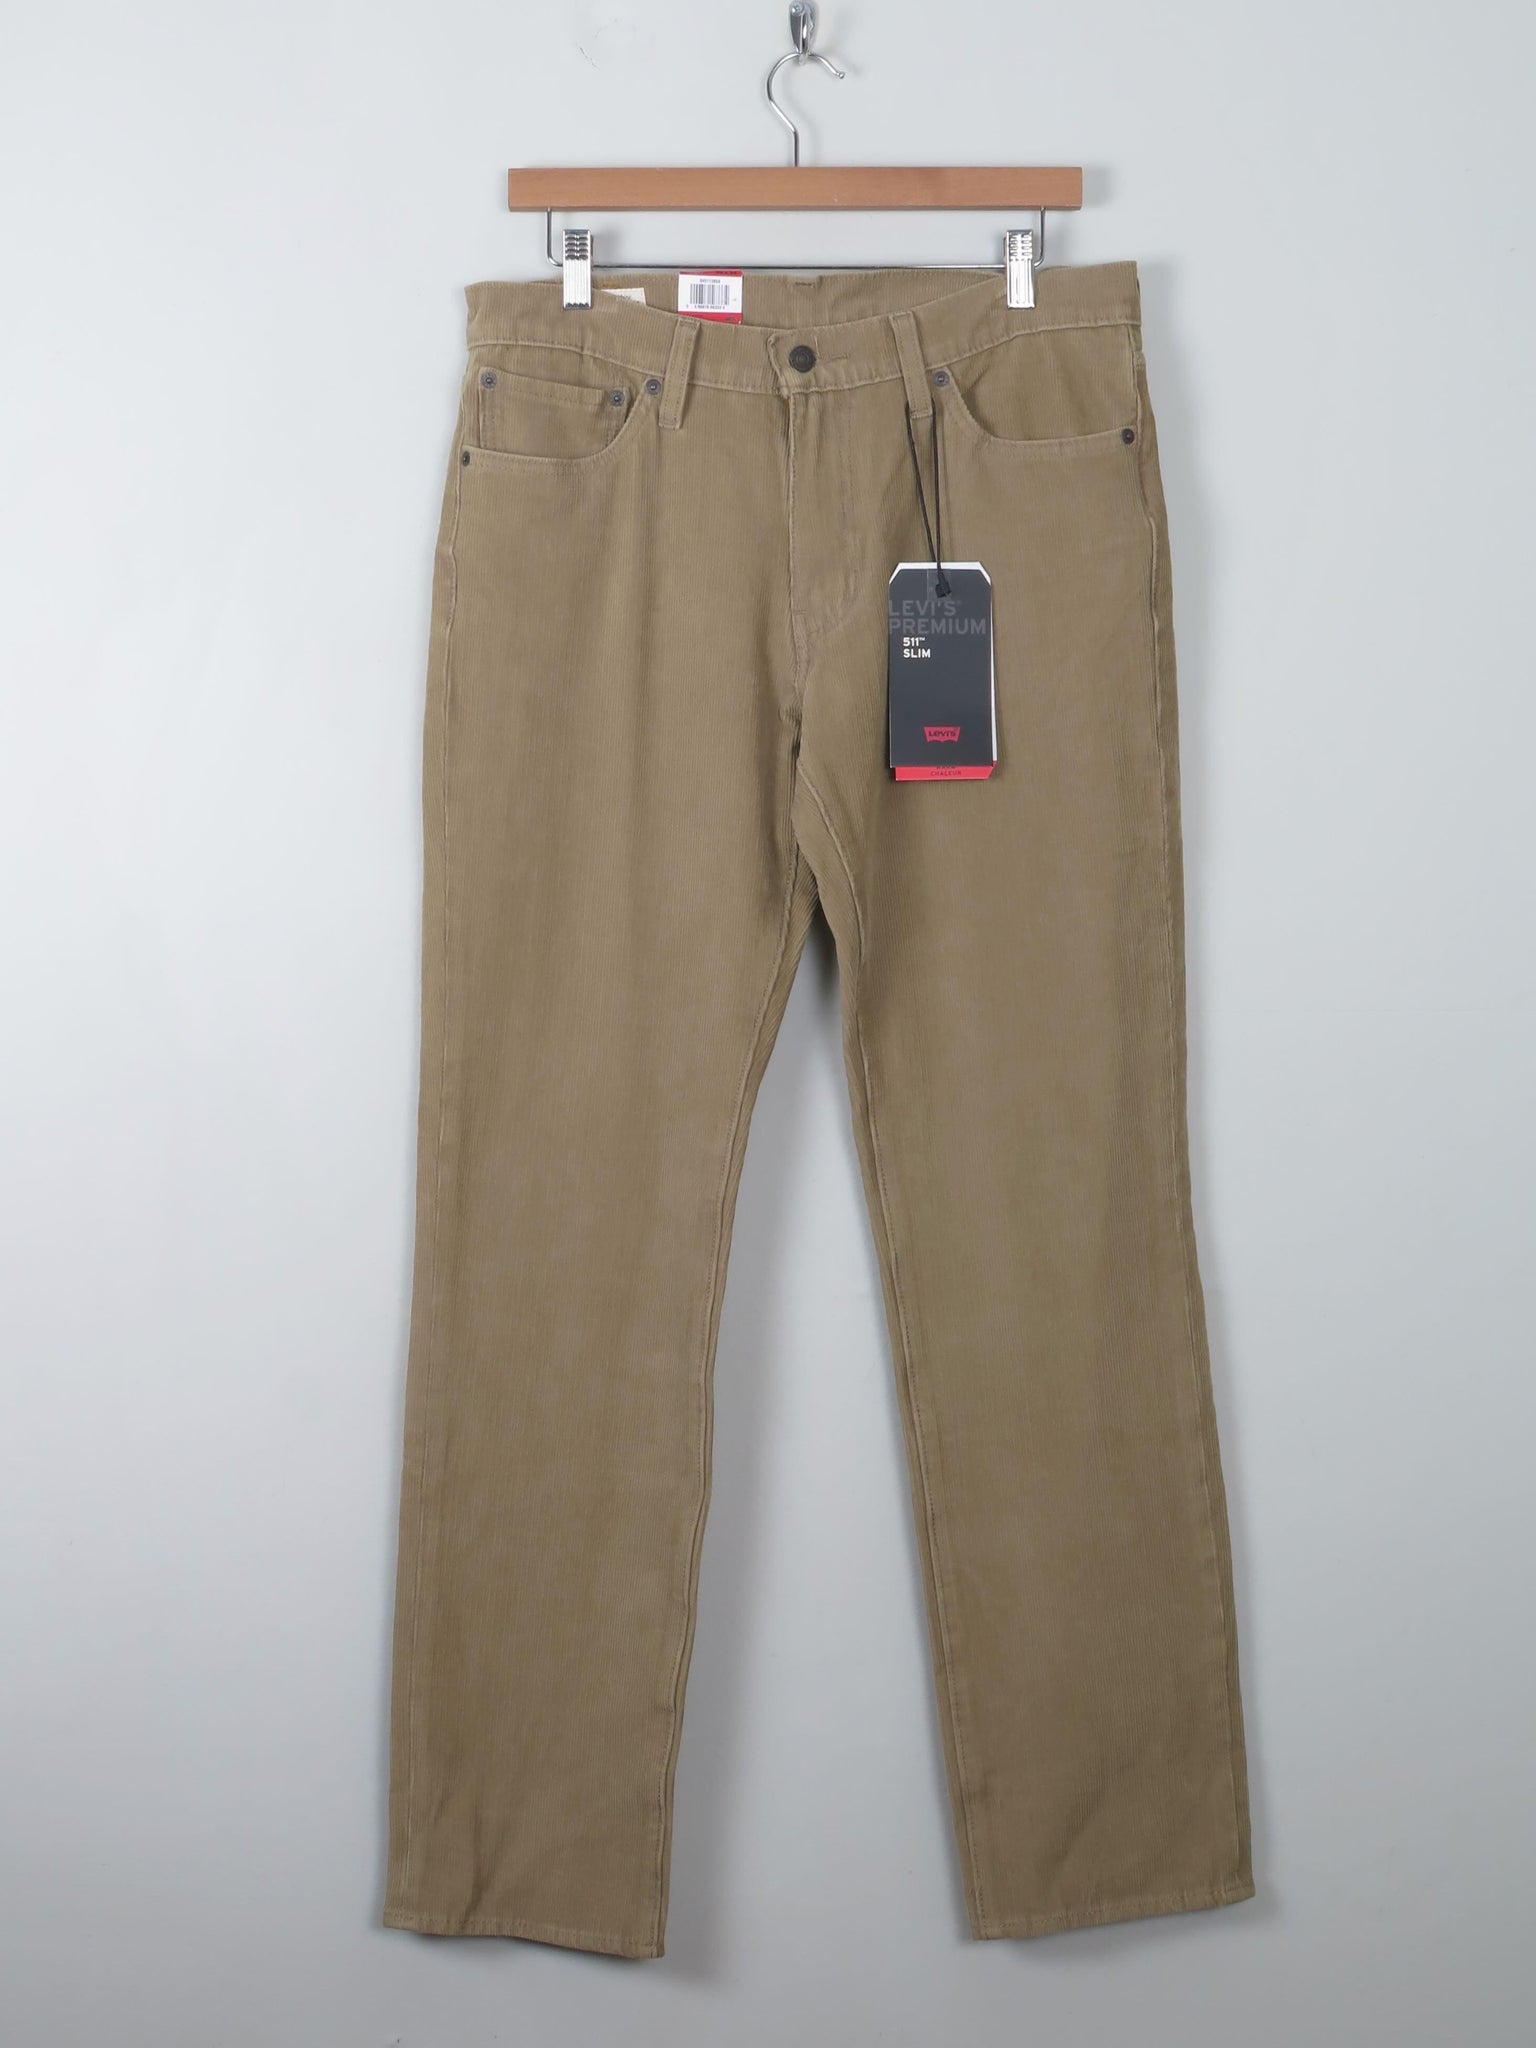 Vintage Style Levi's 511 Corduroy Beige Trousers 33"W/32"L New - The Harlequin